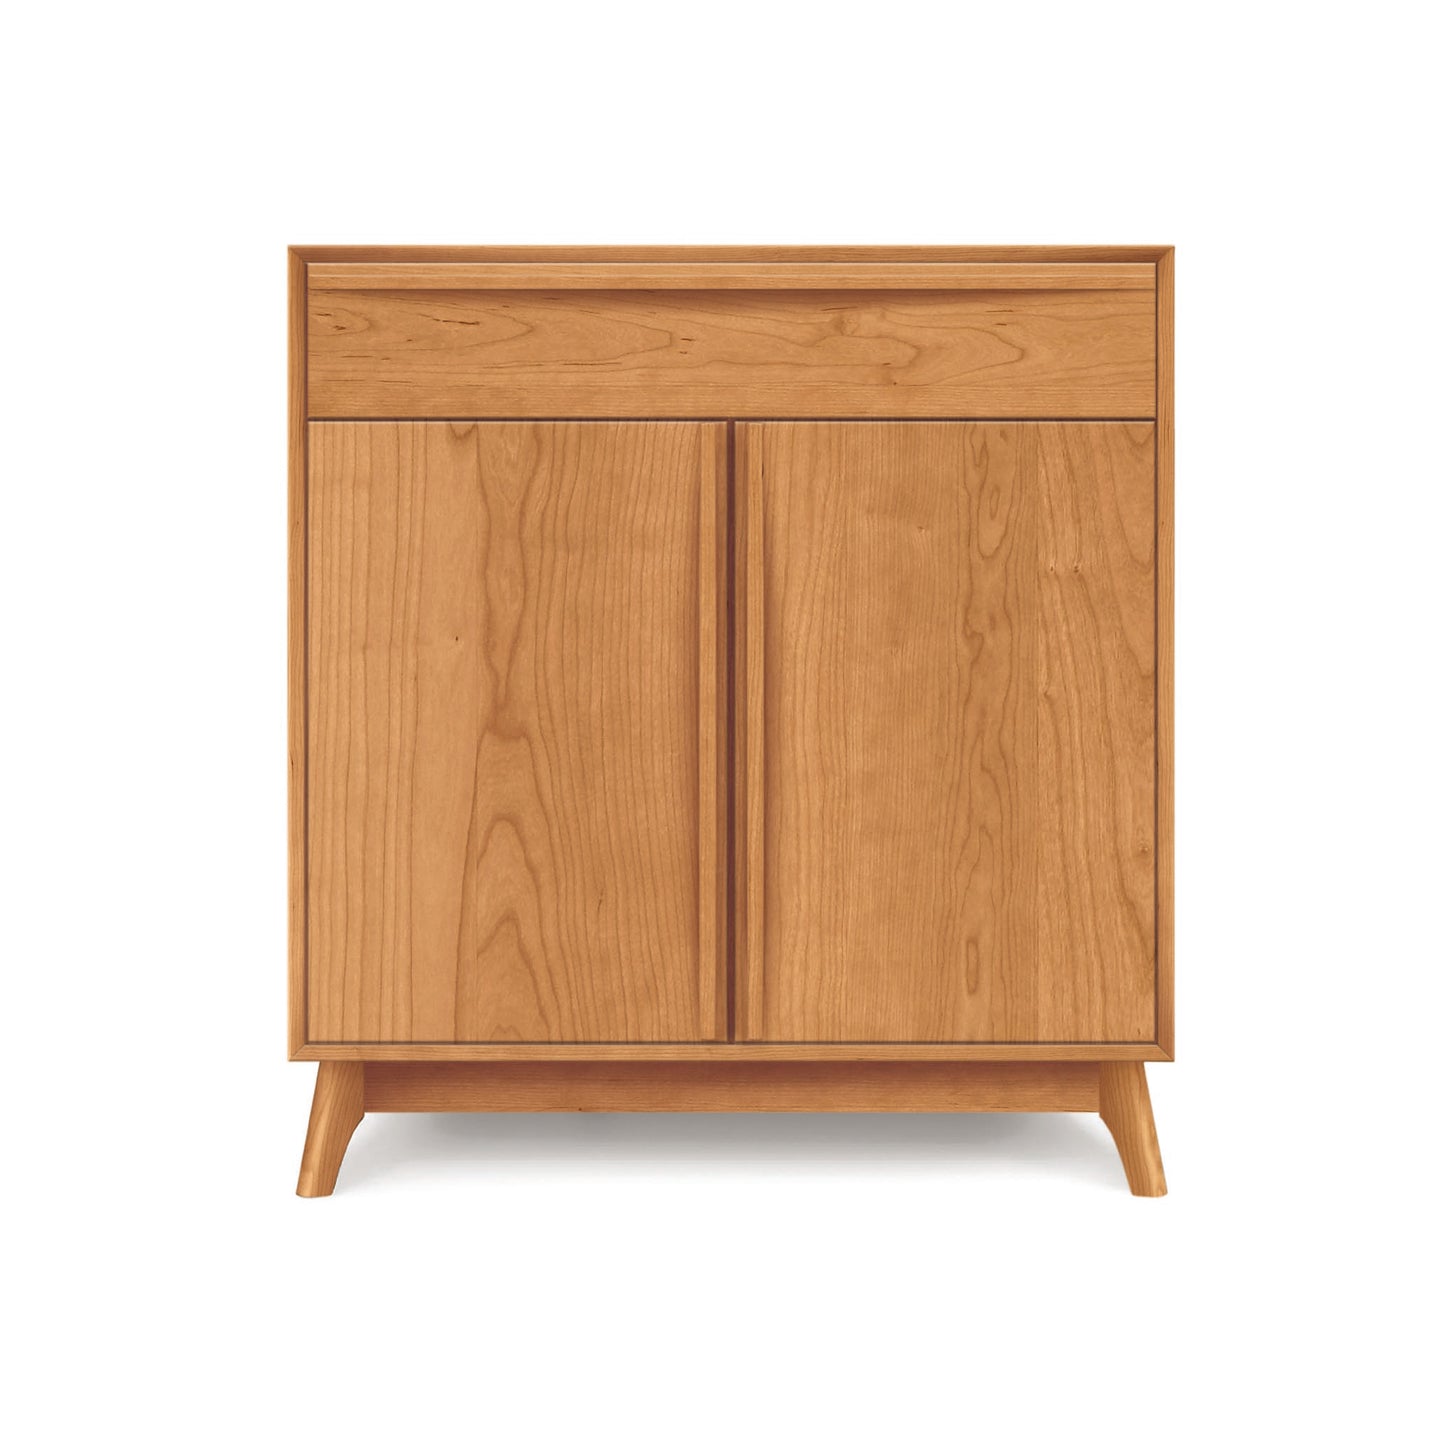 A Catalina 1-Drawer, 2-Door Buffet by Copeland Furniture, positioned against a plain background.